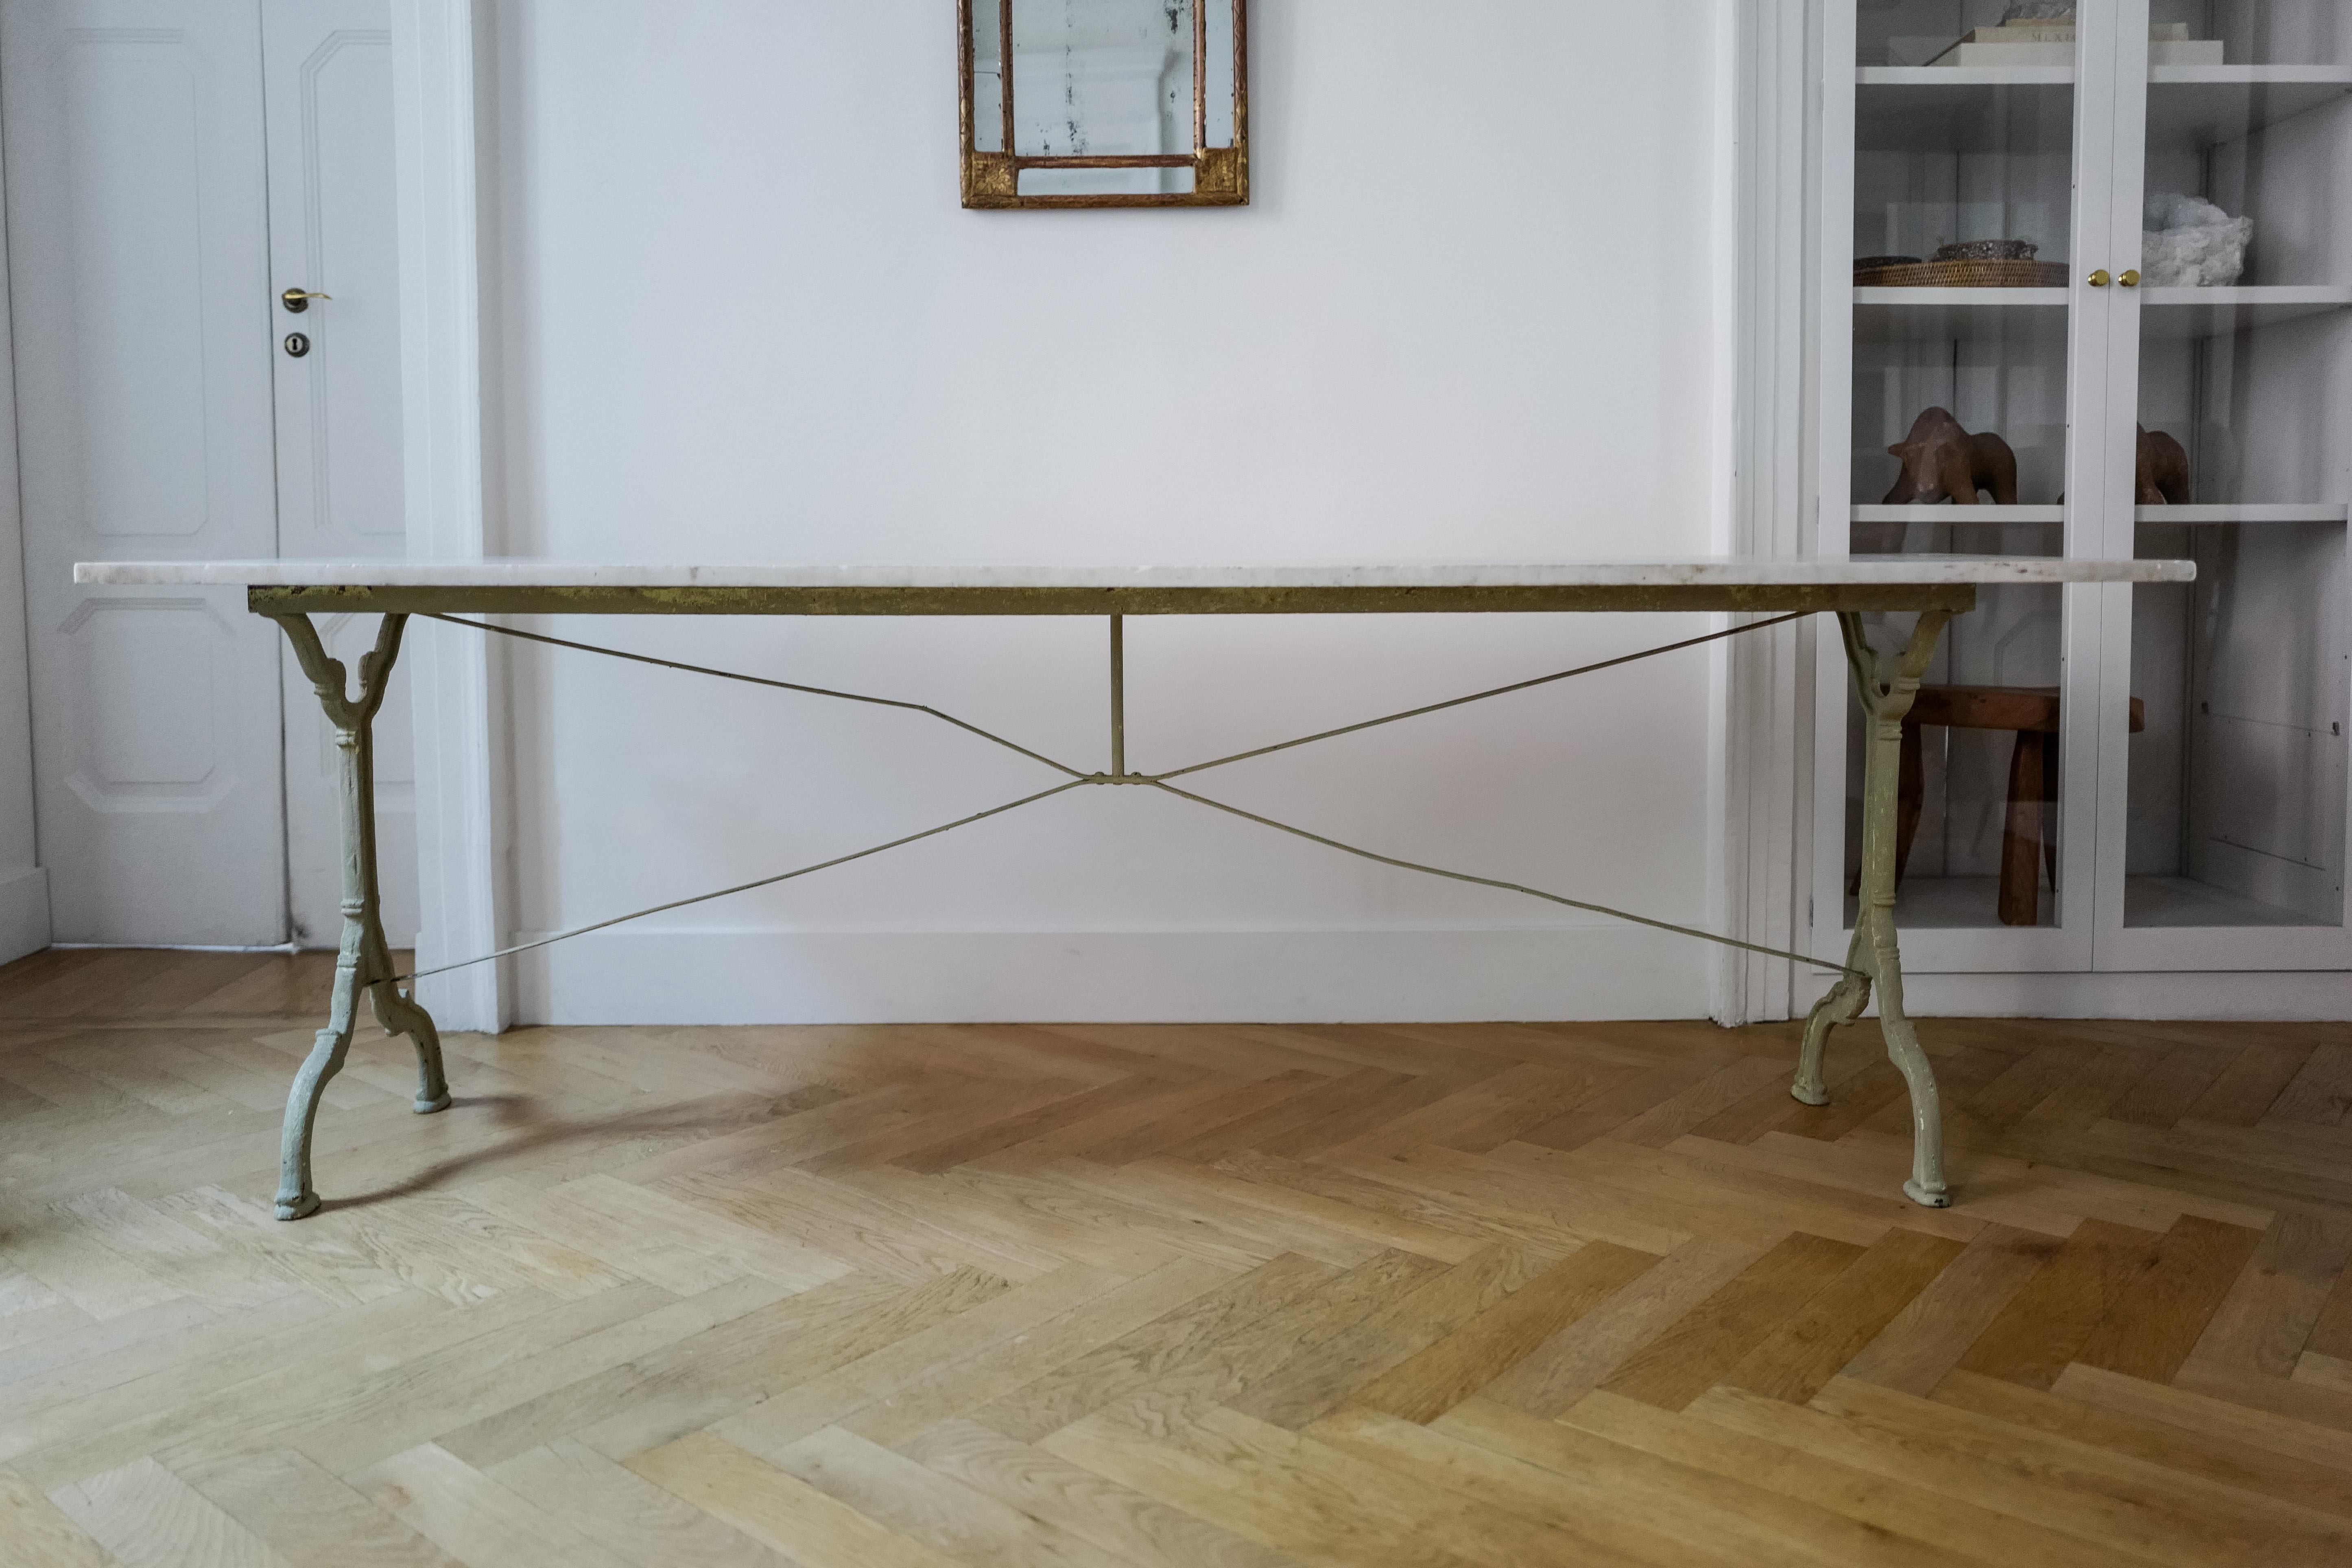 Beautiful 19th Century French garden dining table with a green/grey cast iron base and removable carrara marble top. Marble is heavy *